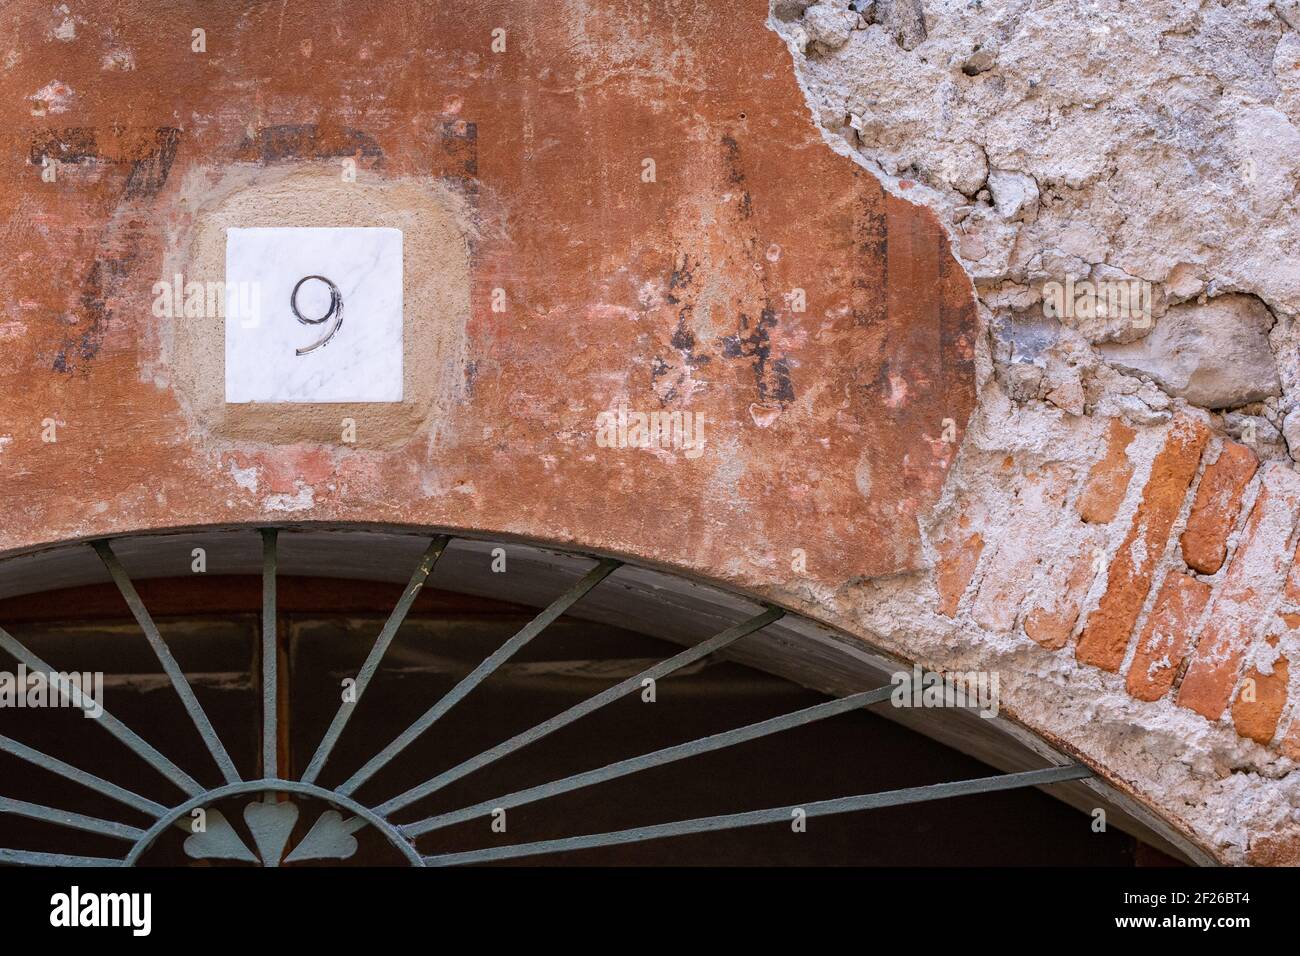 9 ancient house number, concept number Stock Photo